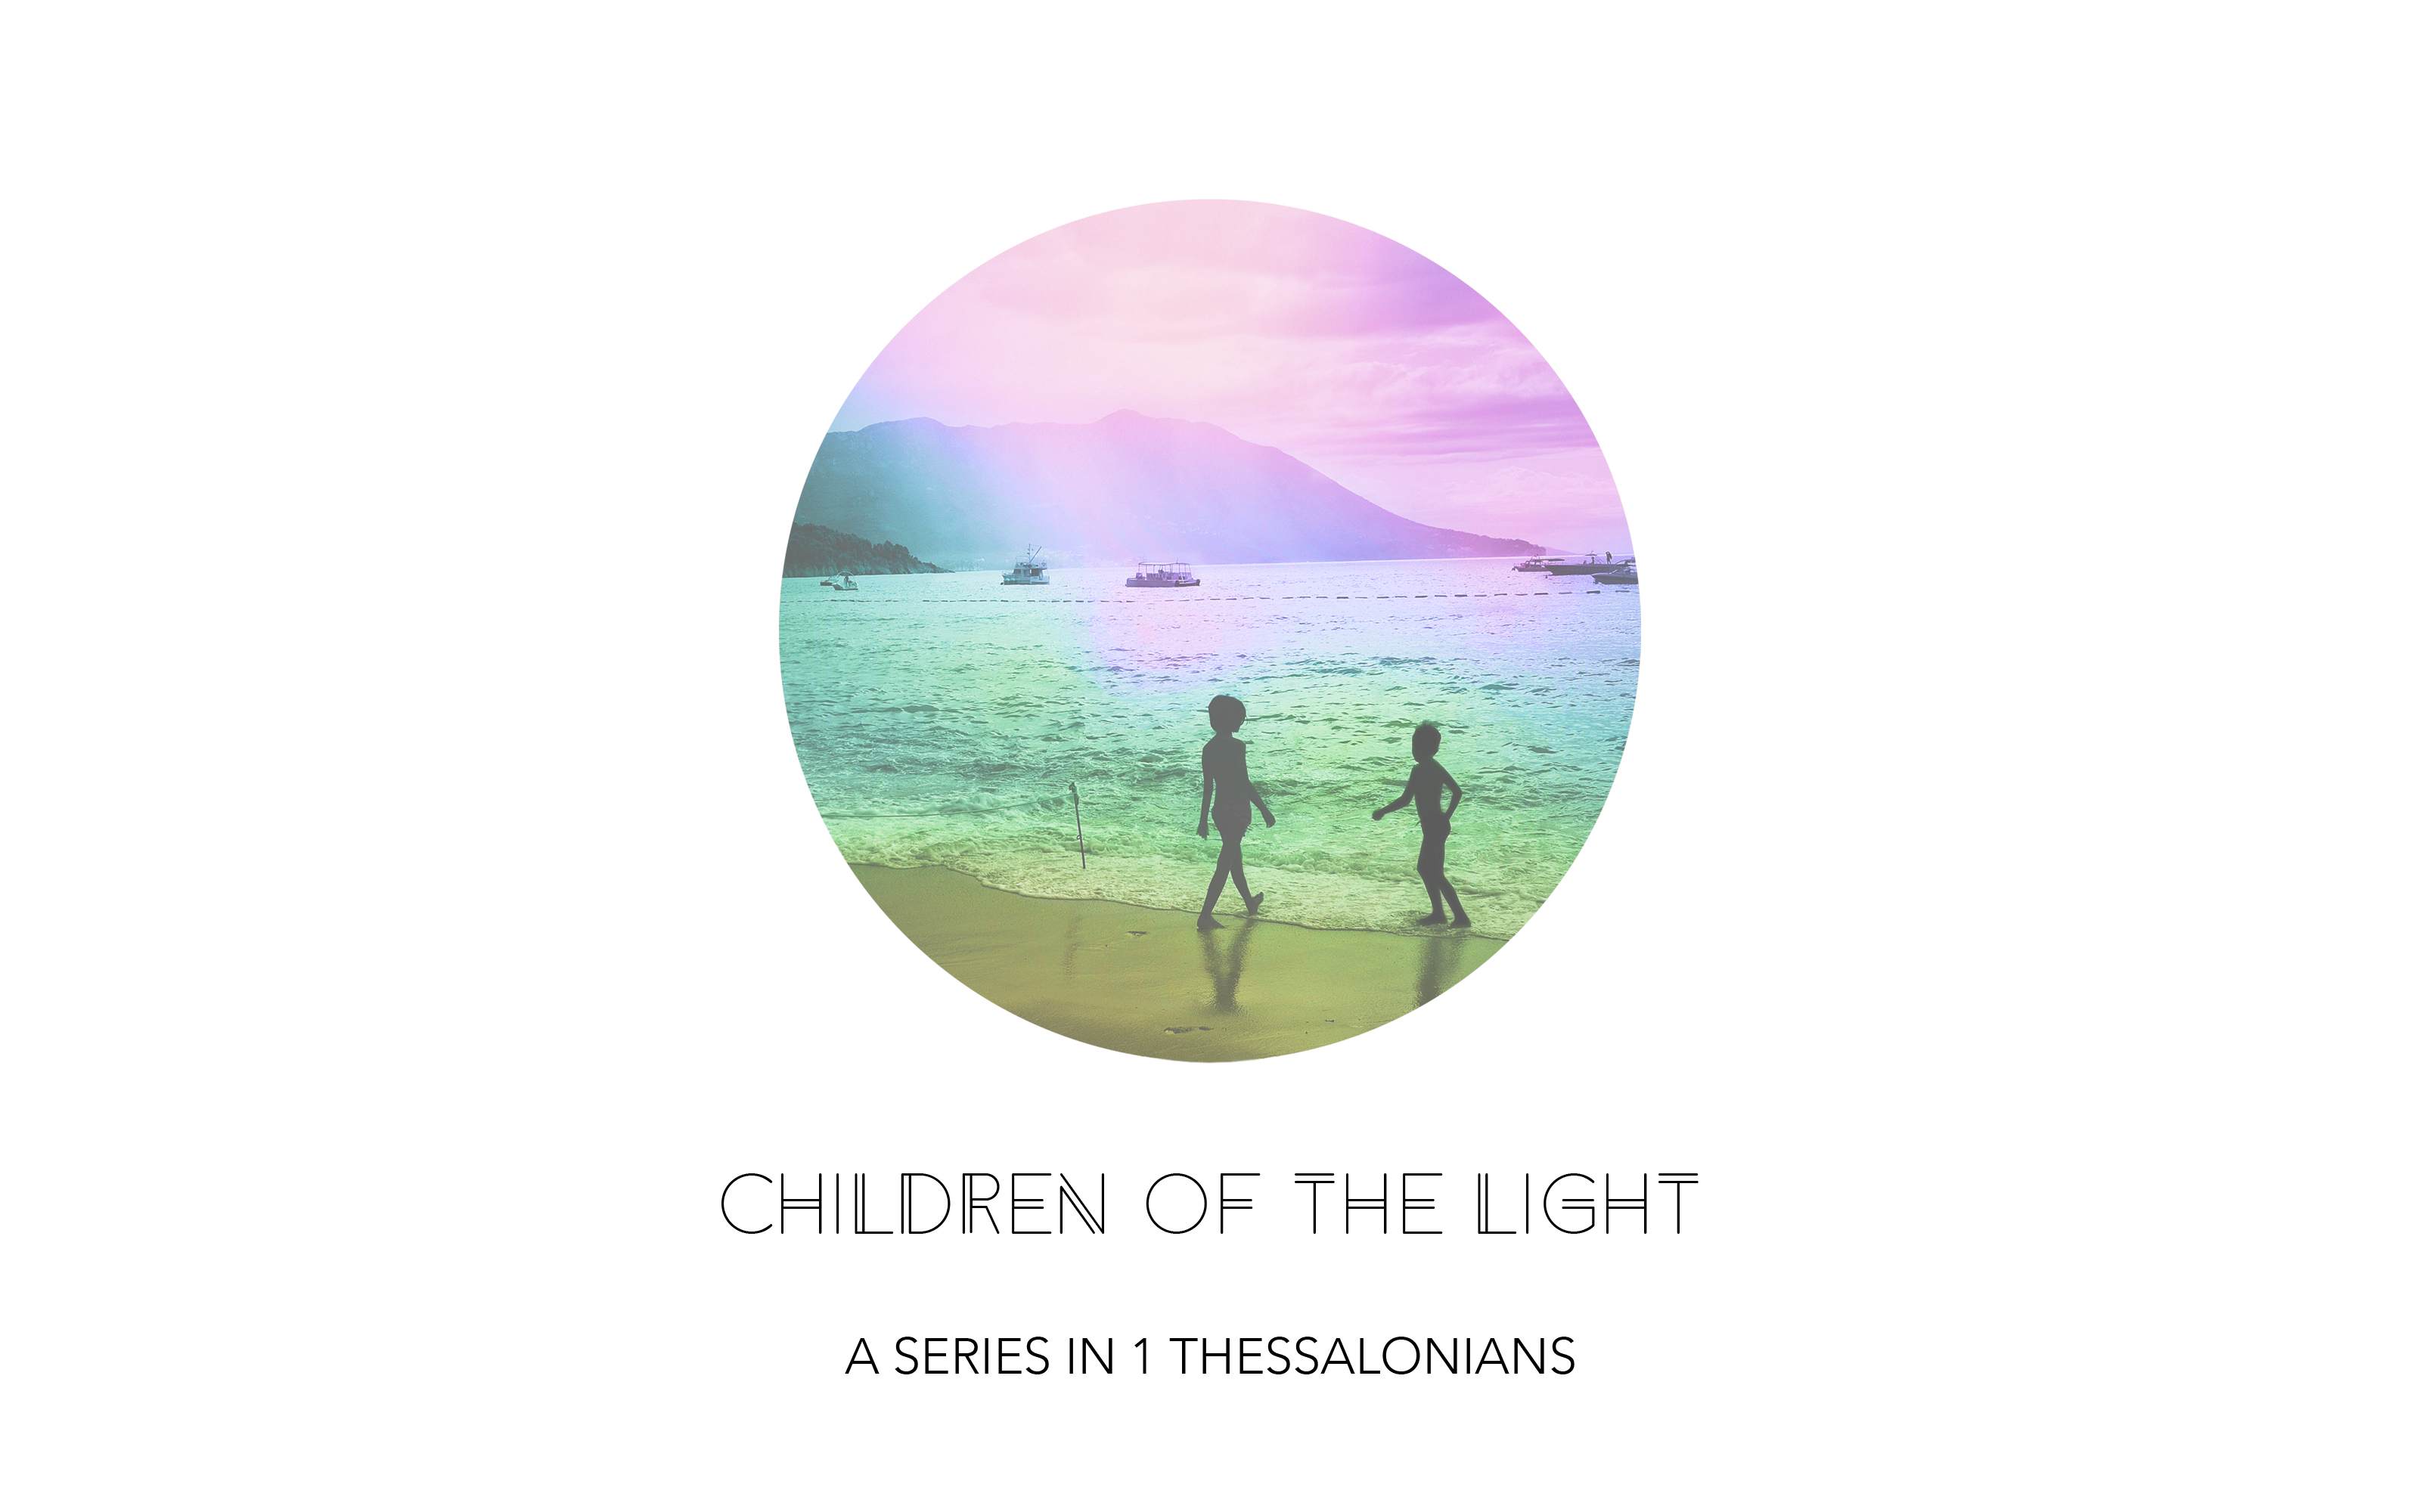 Born Into the Light (1 Thessalonians 1:1-10)